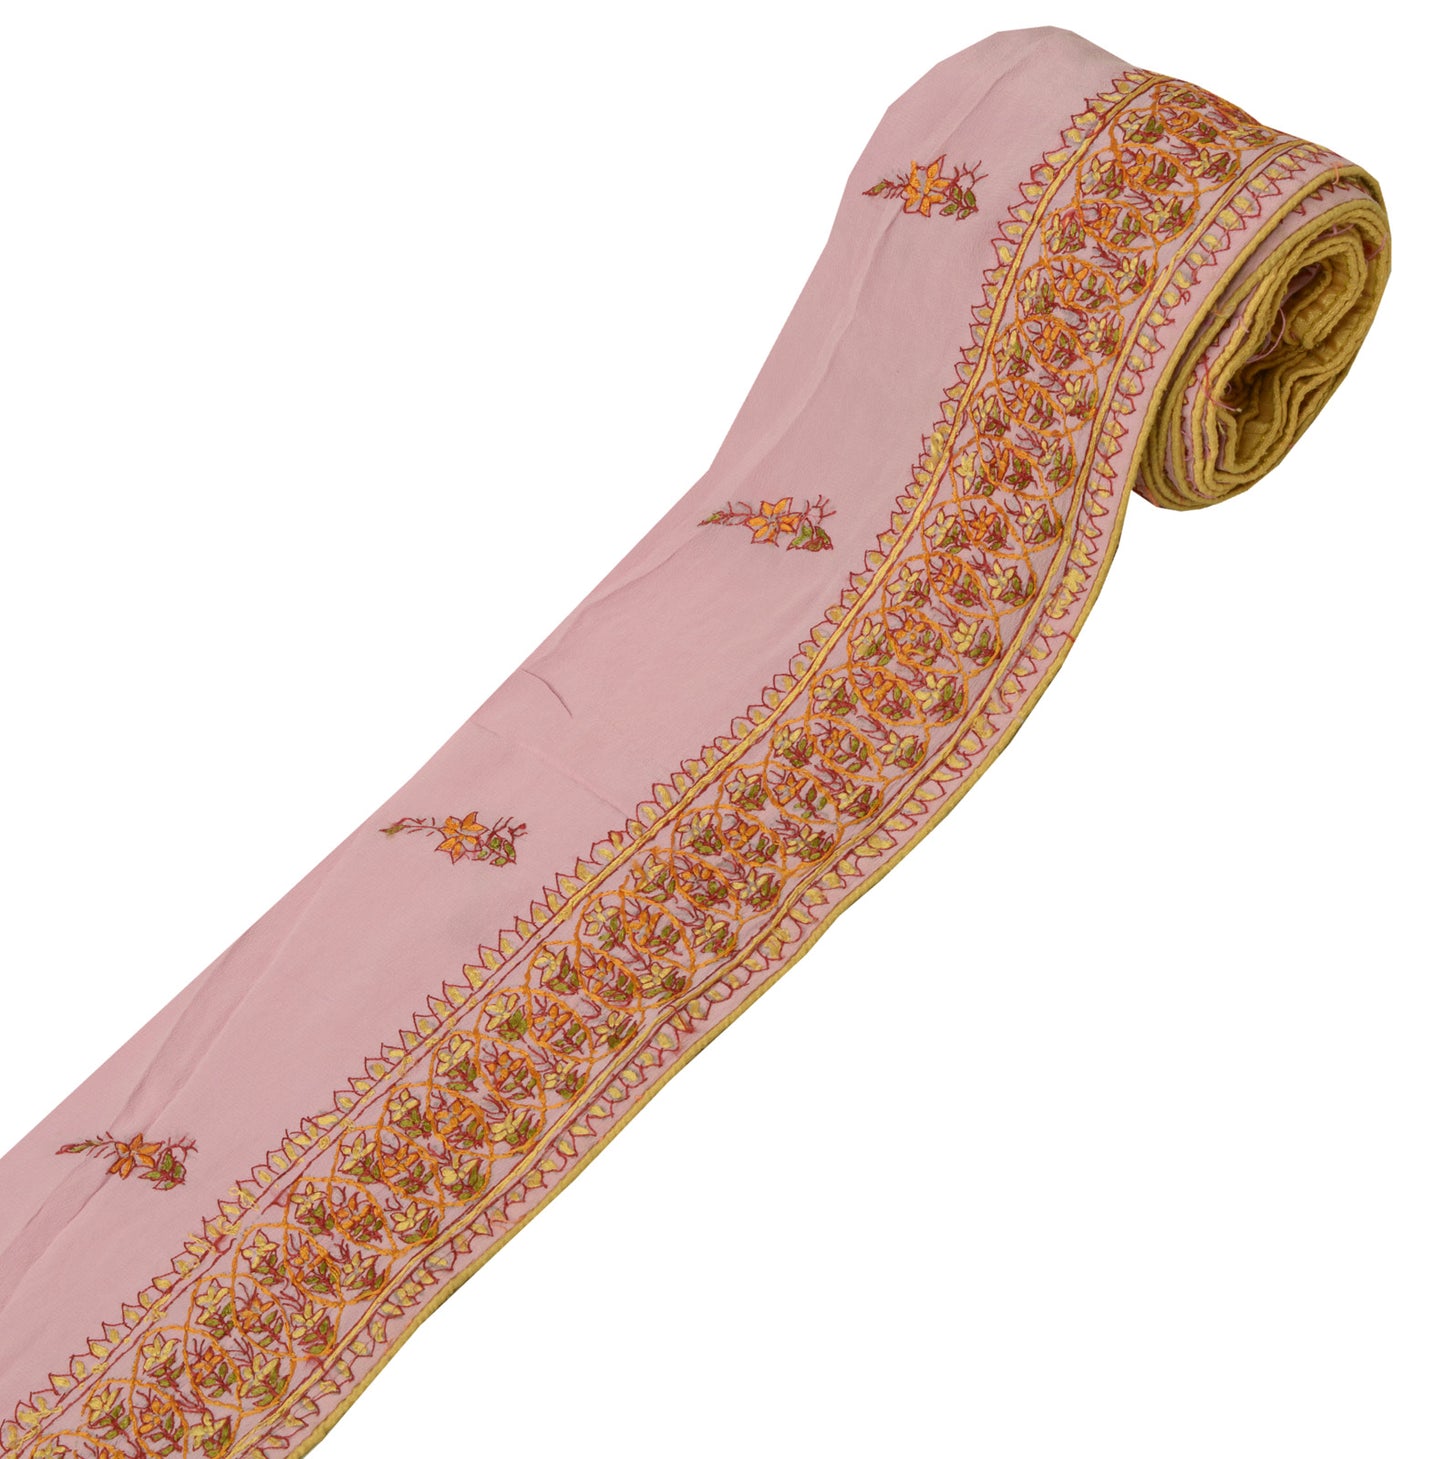 Sushila Vintage Pink Saree Border Craft Sewing Trim Hand Embroidered Lace Ribbon